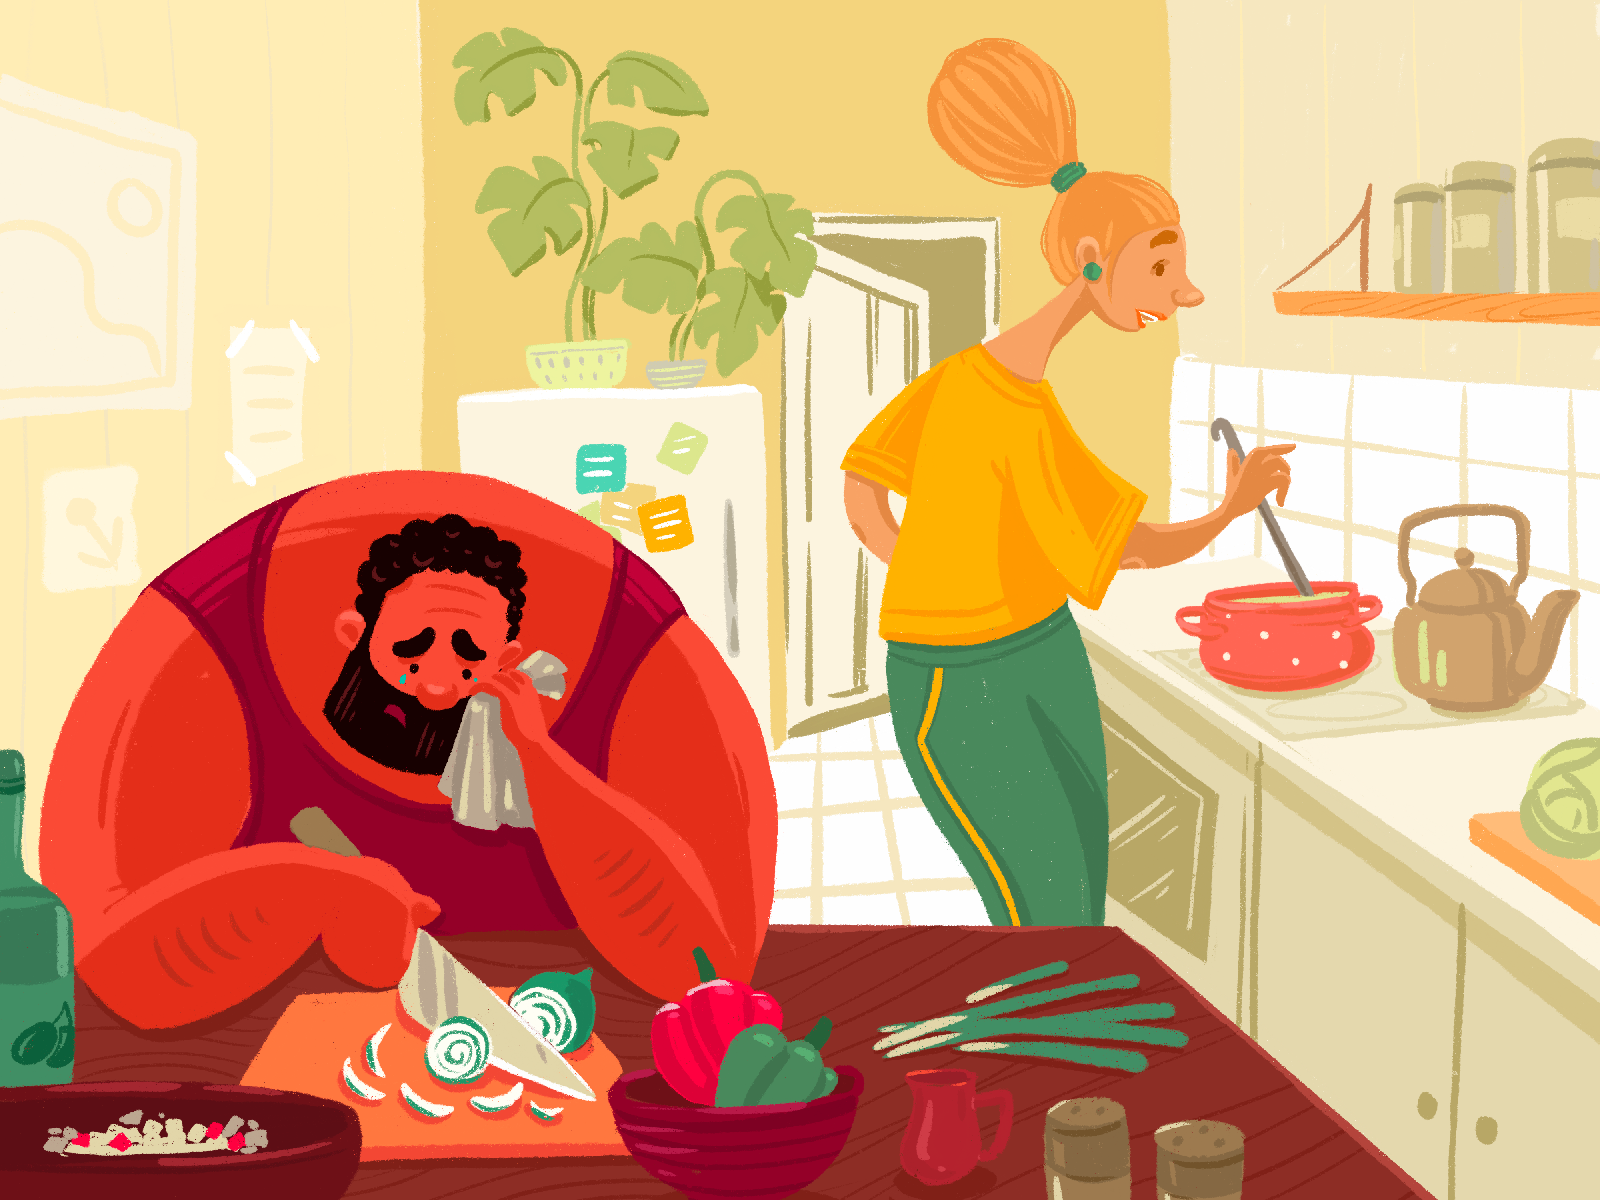 Cooking Together Illustration by tubik.arts on Dribbble